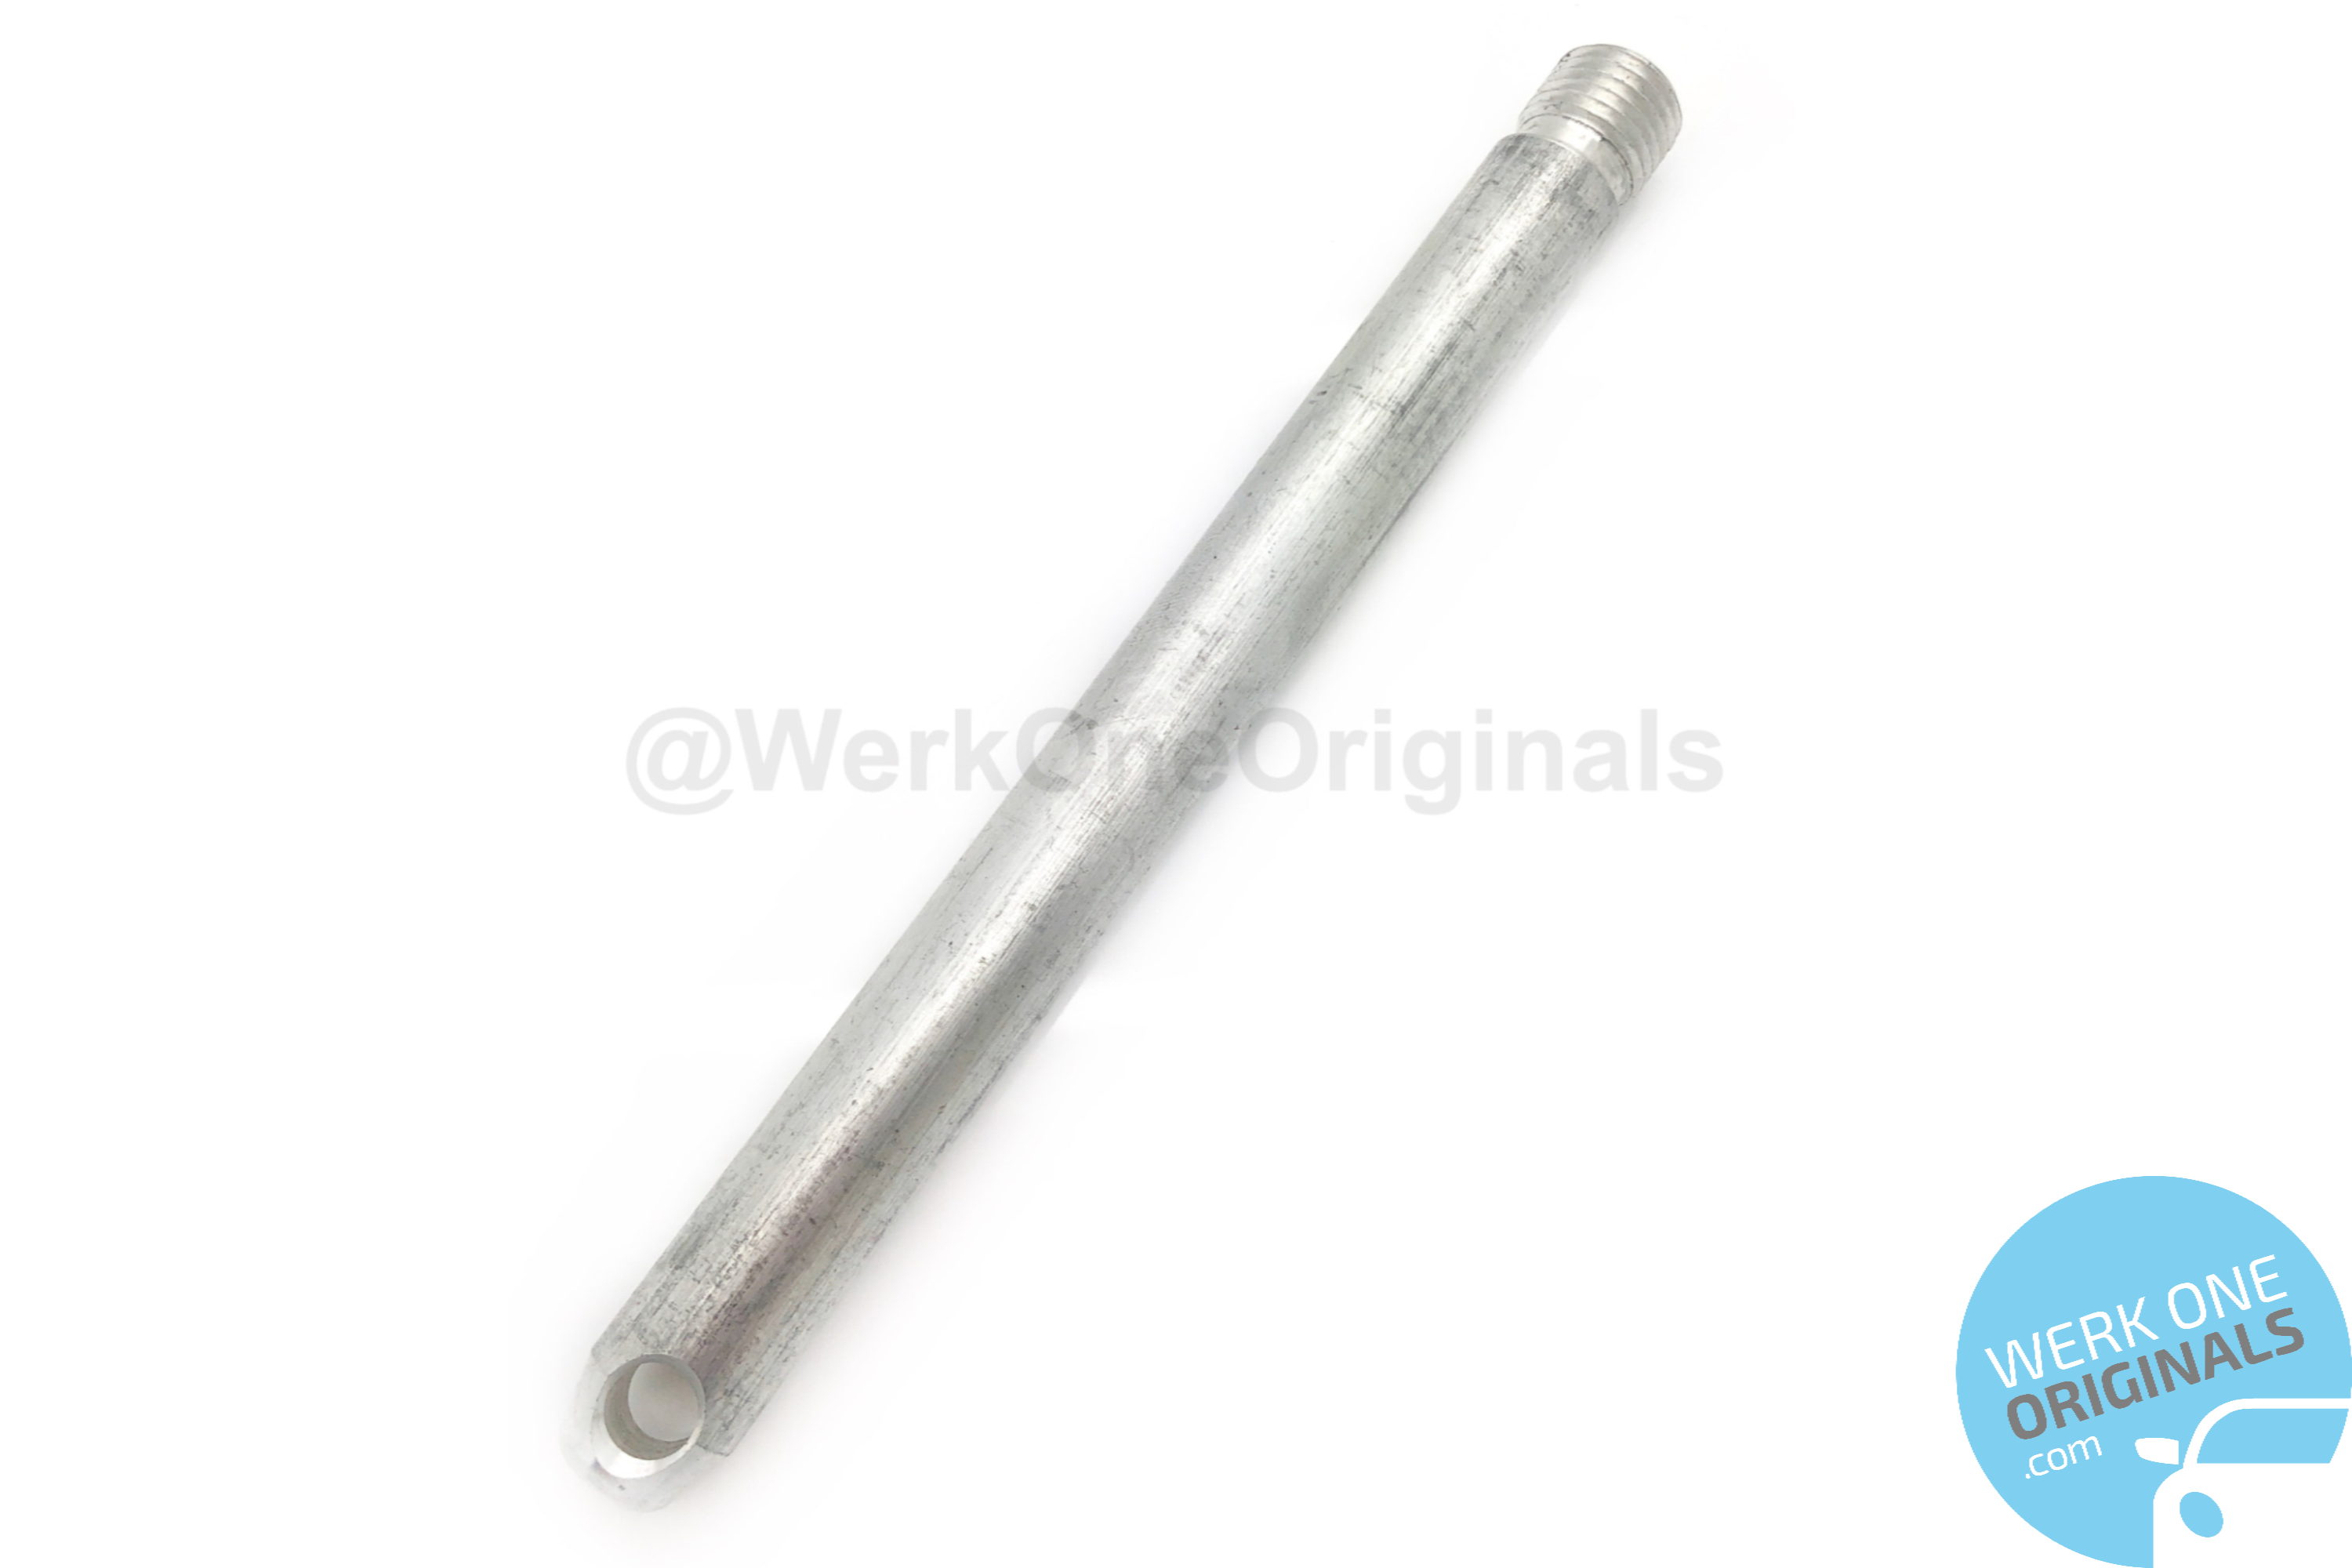 Porsche Official Wheel Removal Tool for 911 Type 996 Models